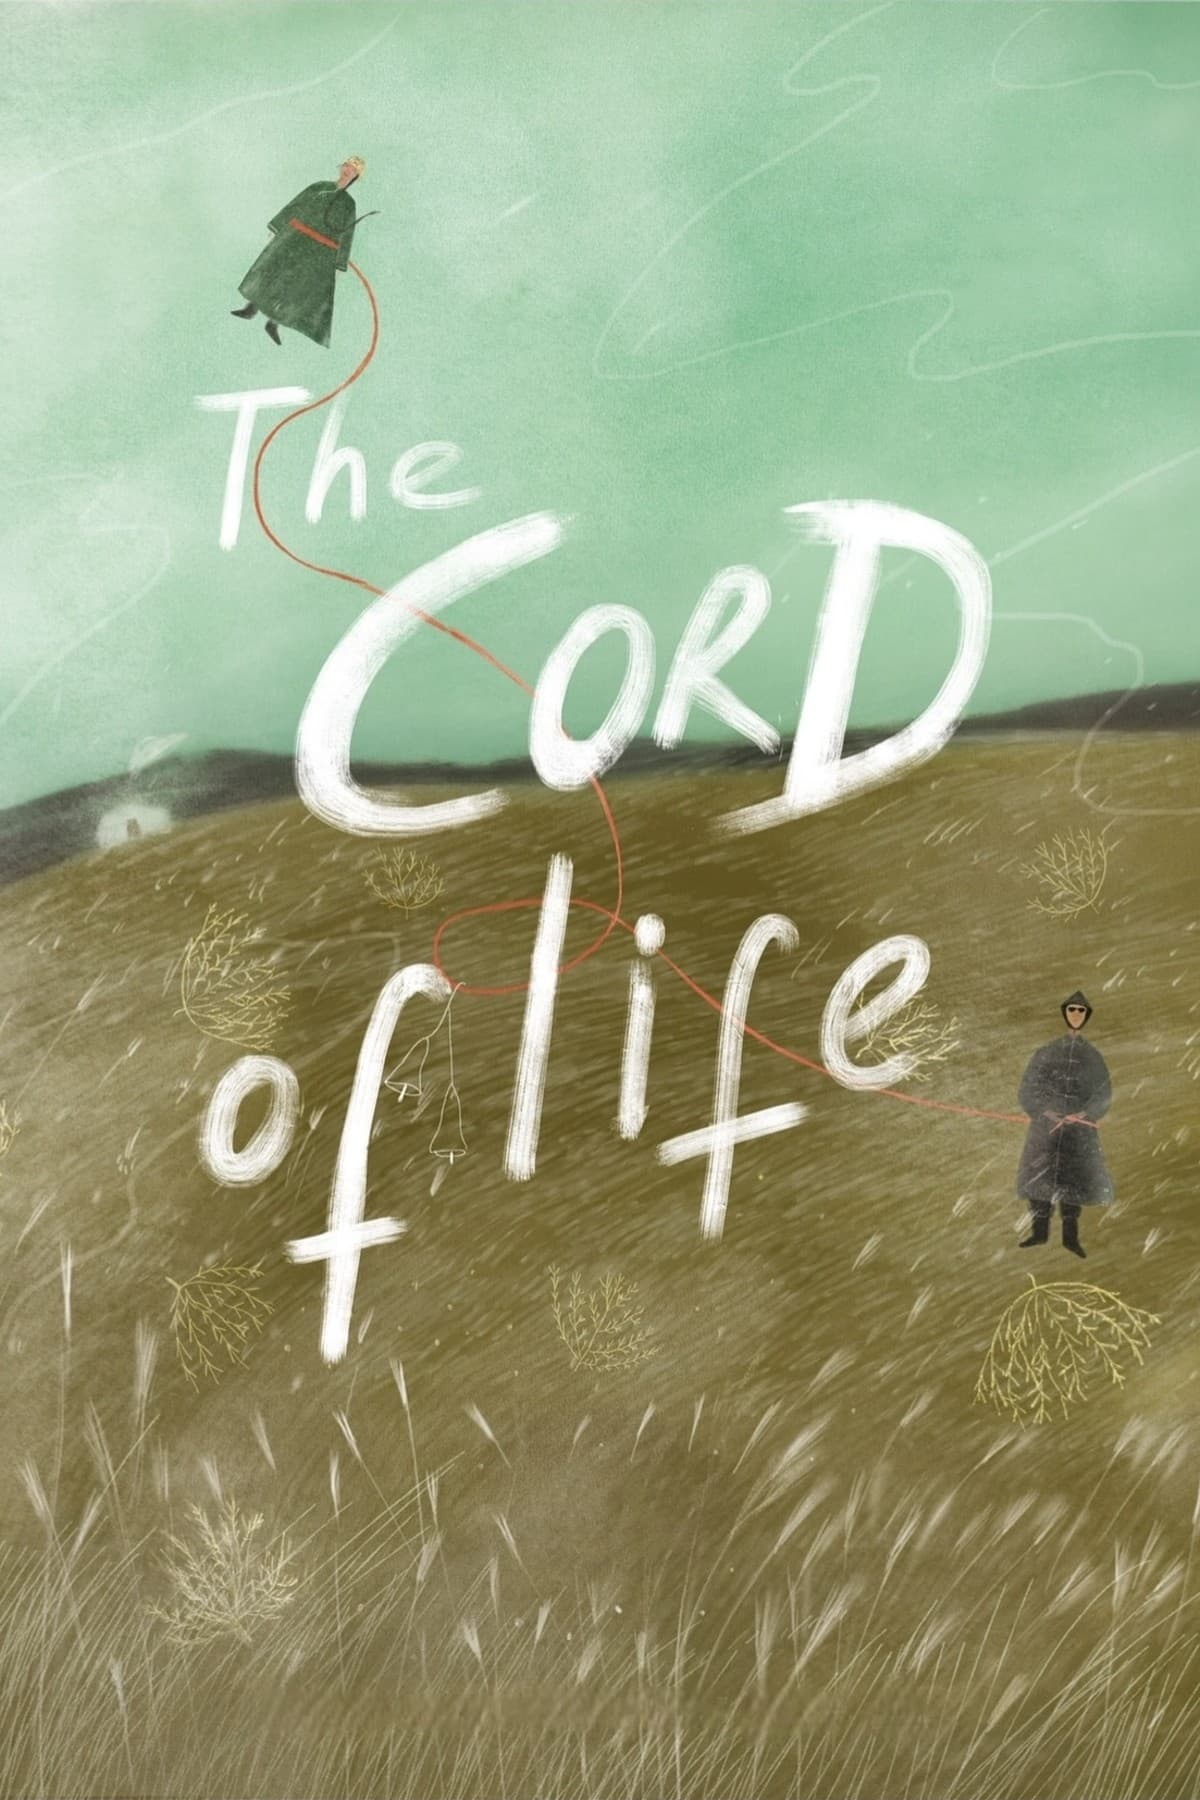 The Cord of life